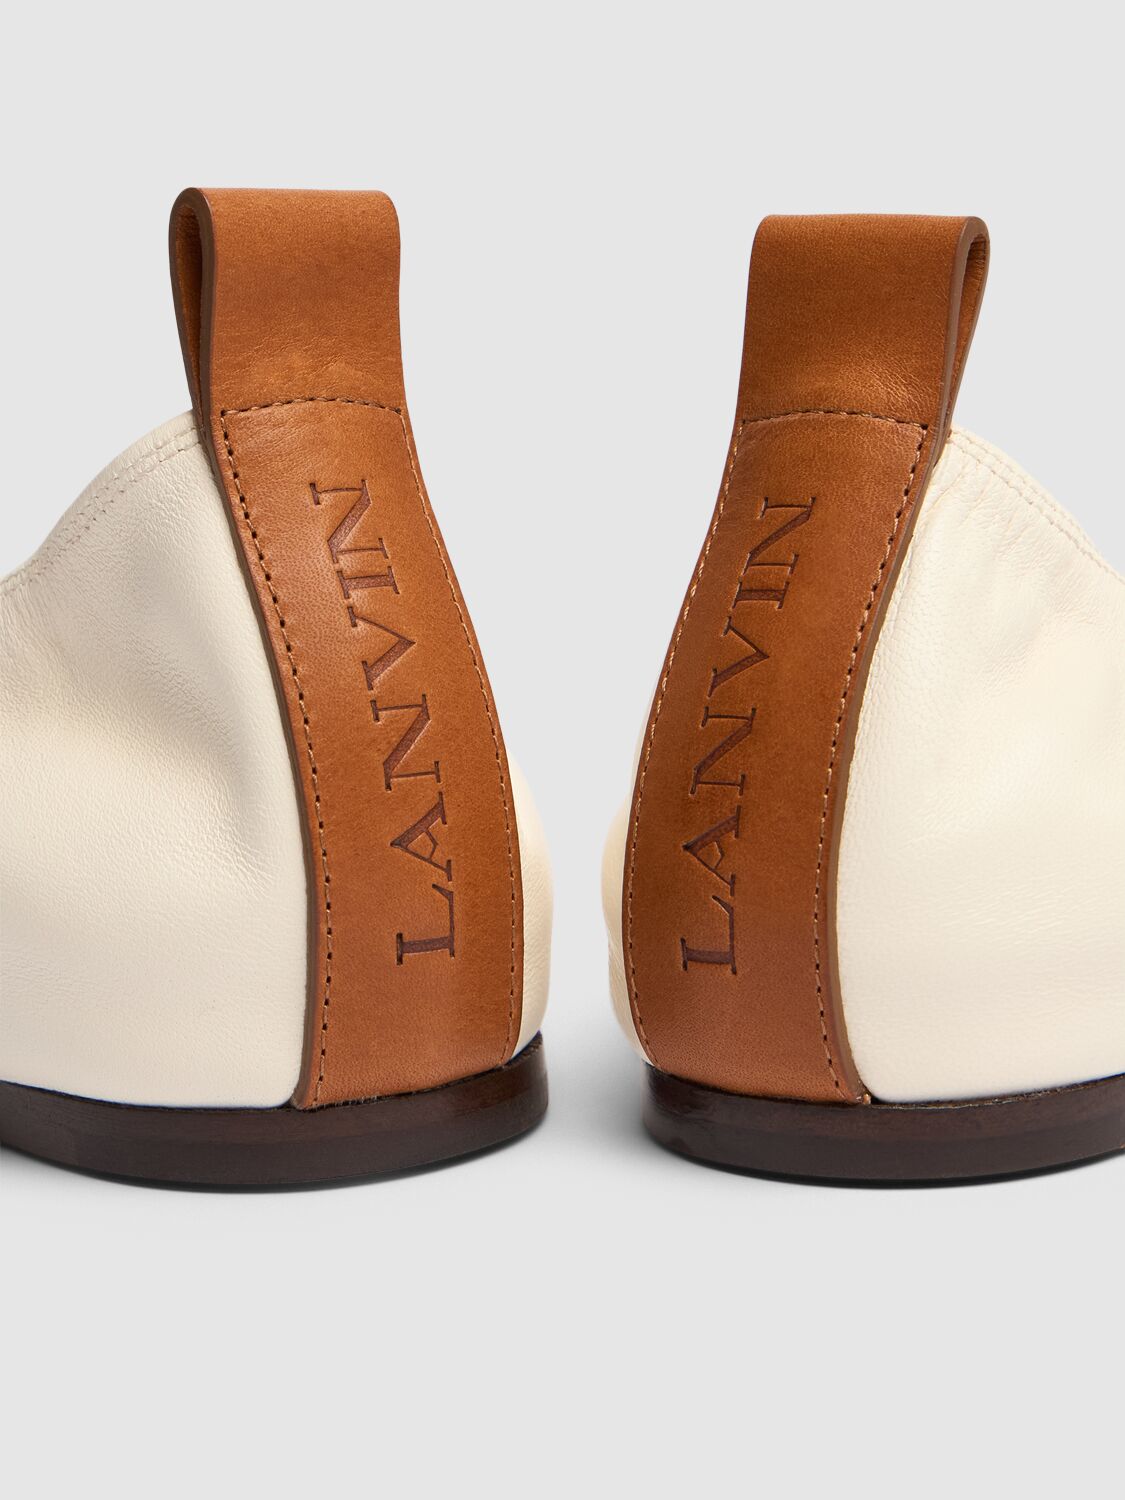 Shop Lanvin 5mm Leather Ballerina Flats In White